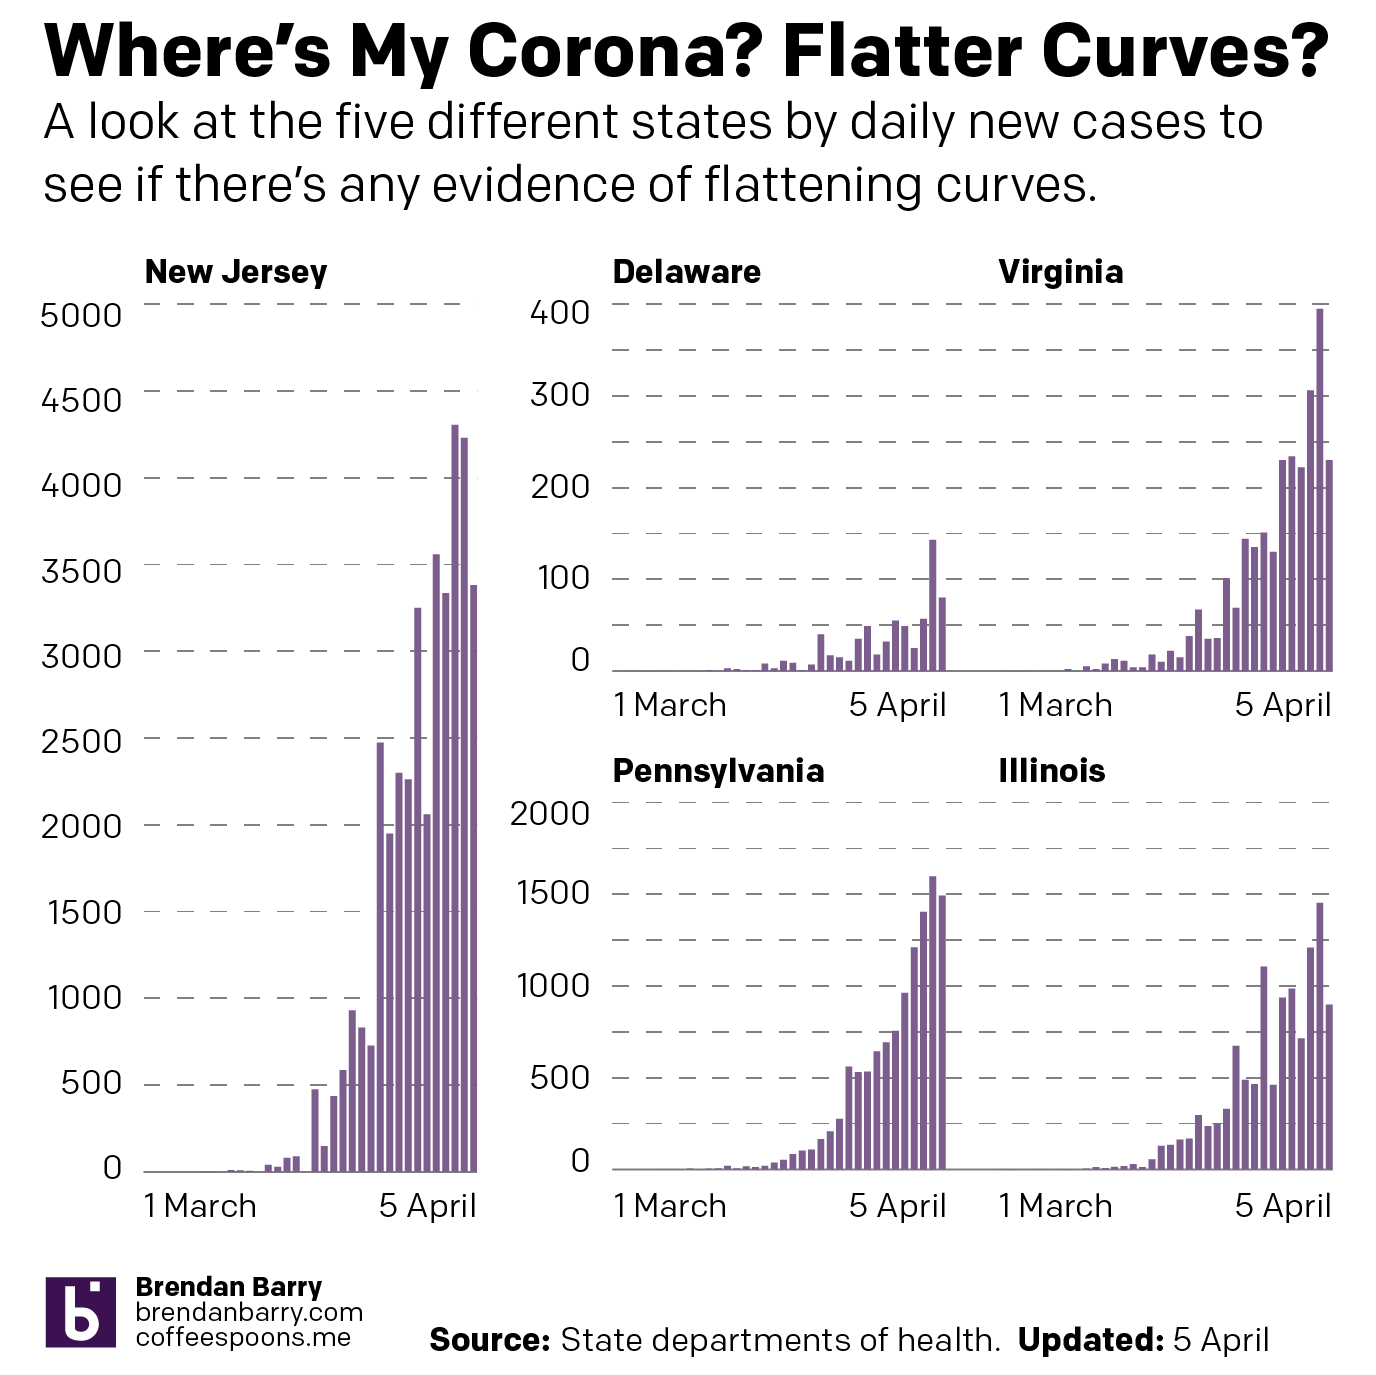 The case for flattening curves